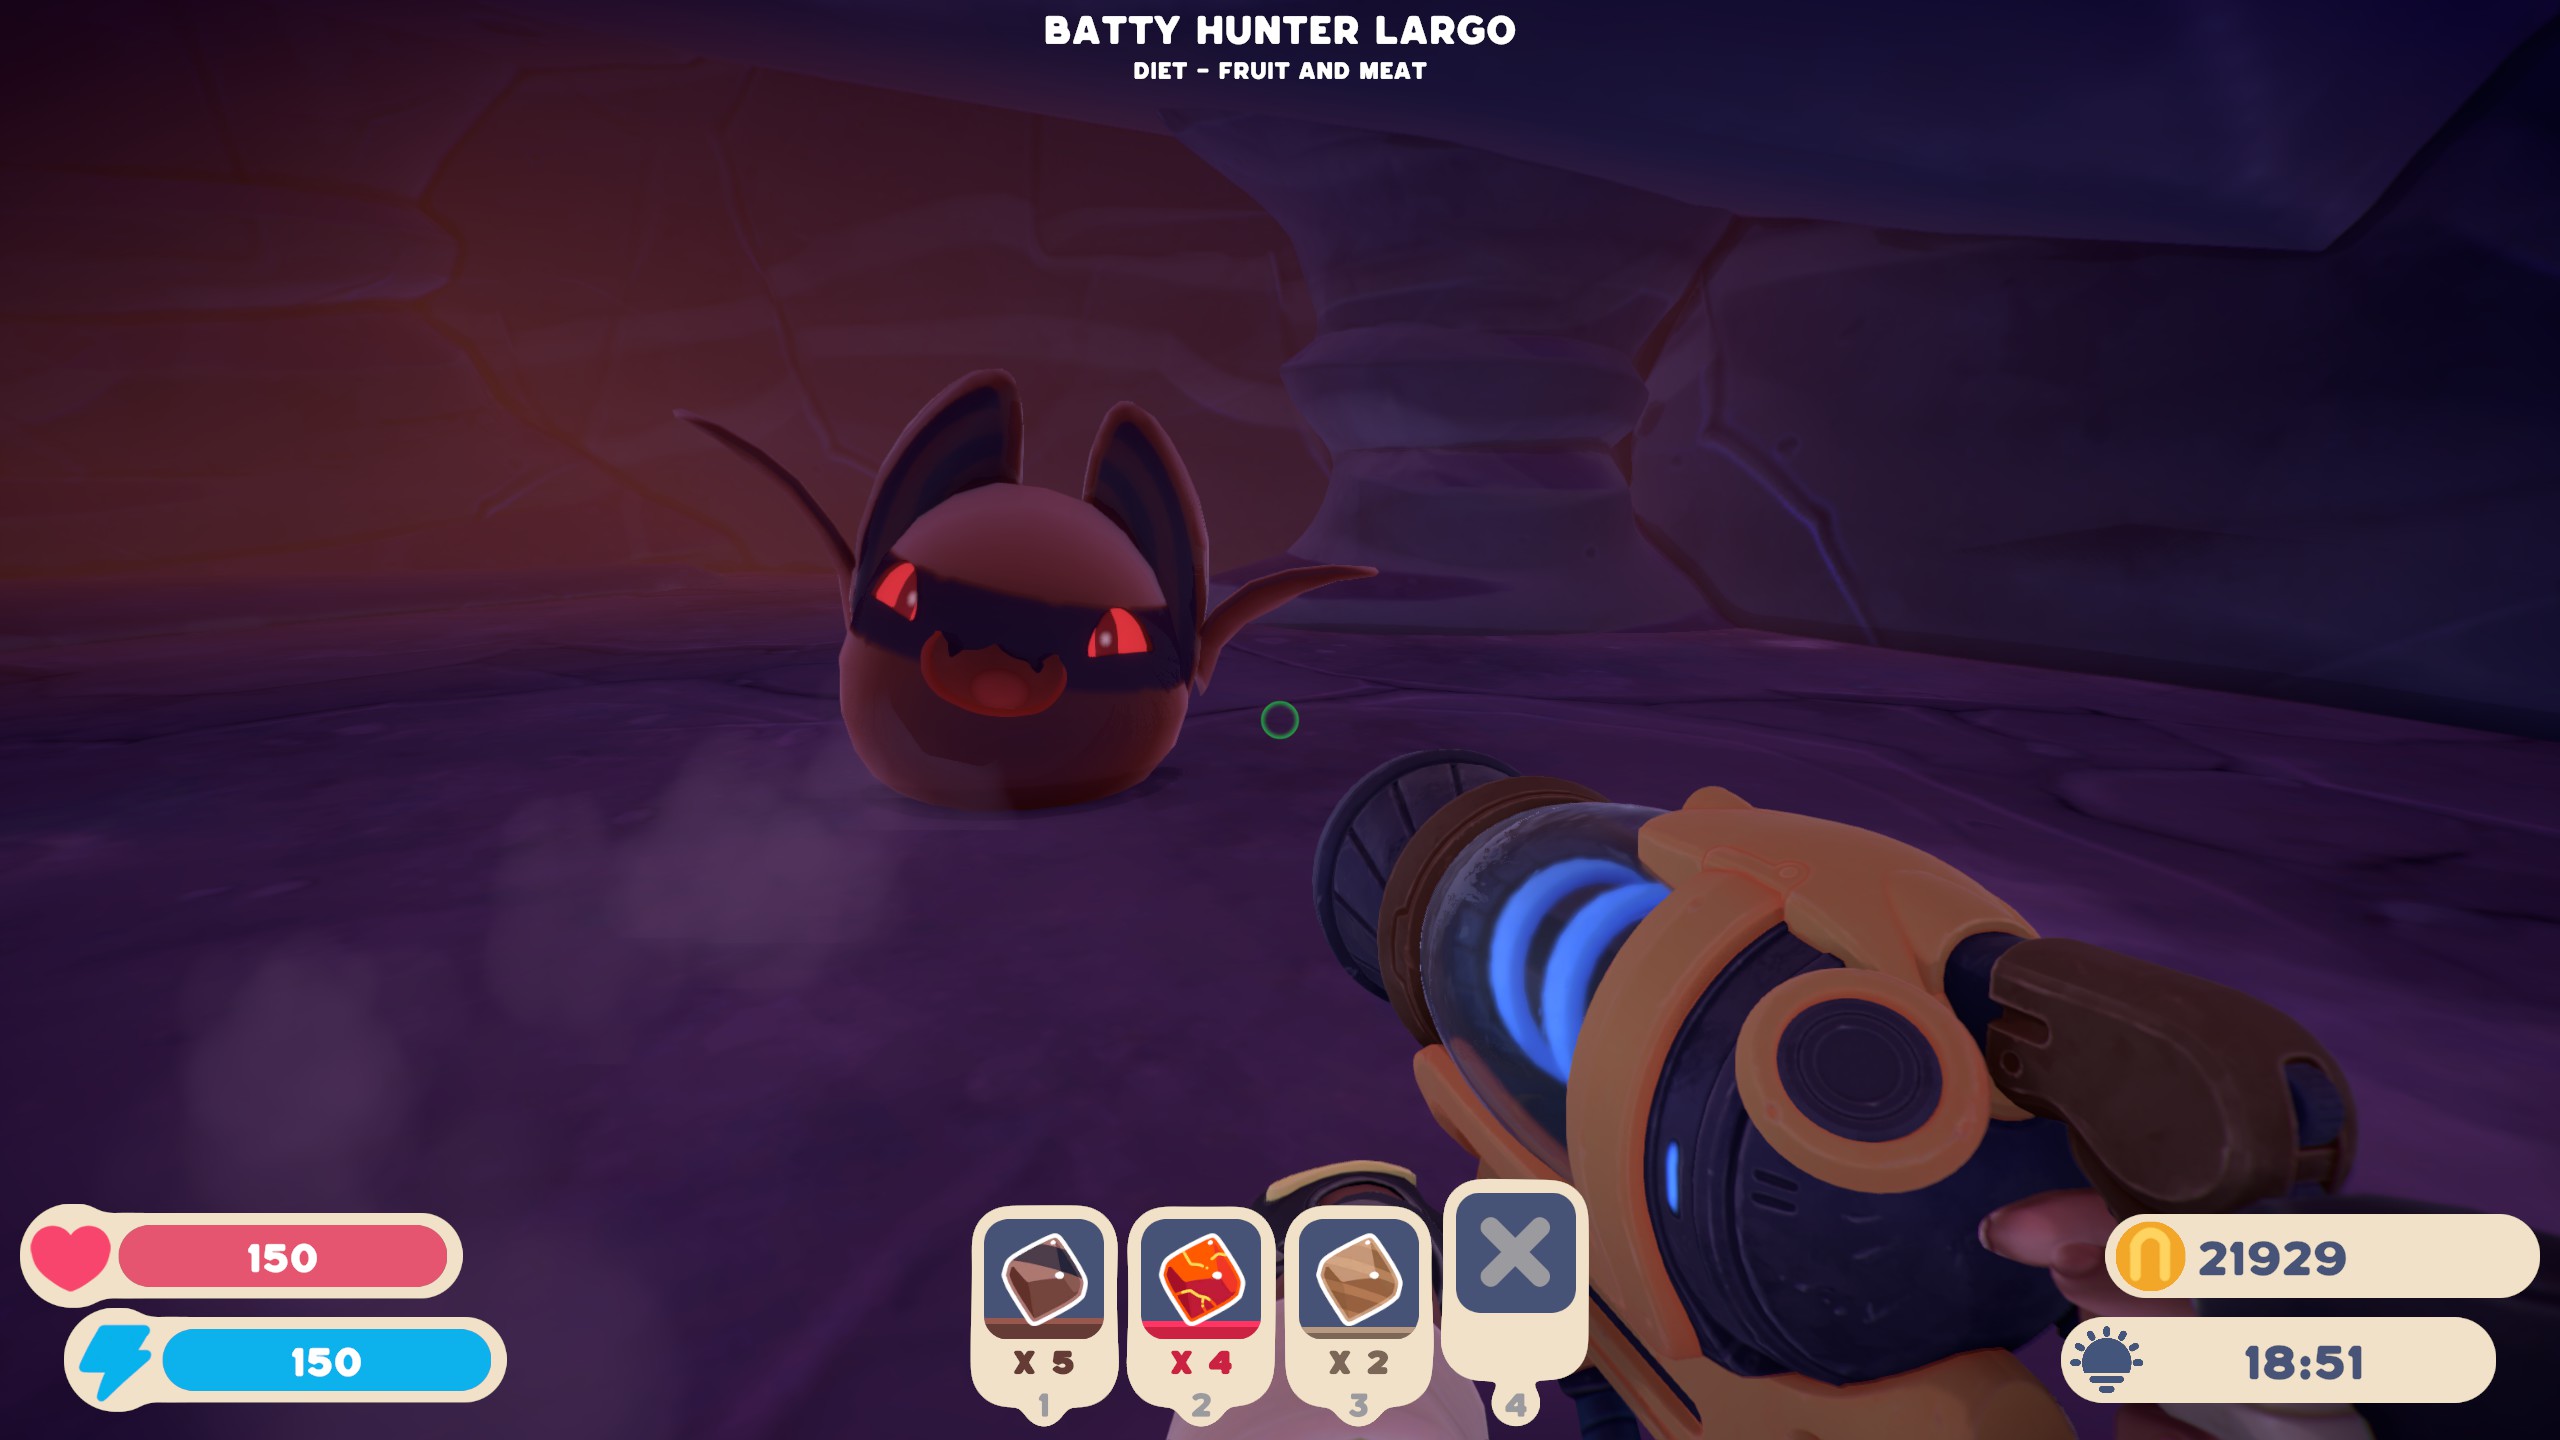 Slime Rancher 2 All Largo Slime Combinations - Batty - 3F25A11